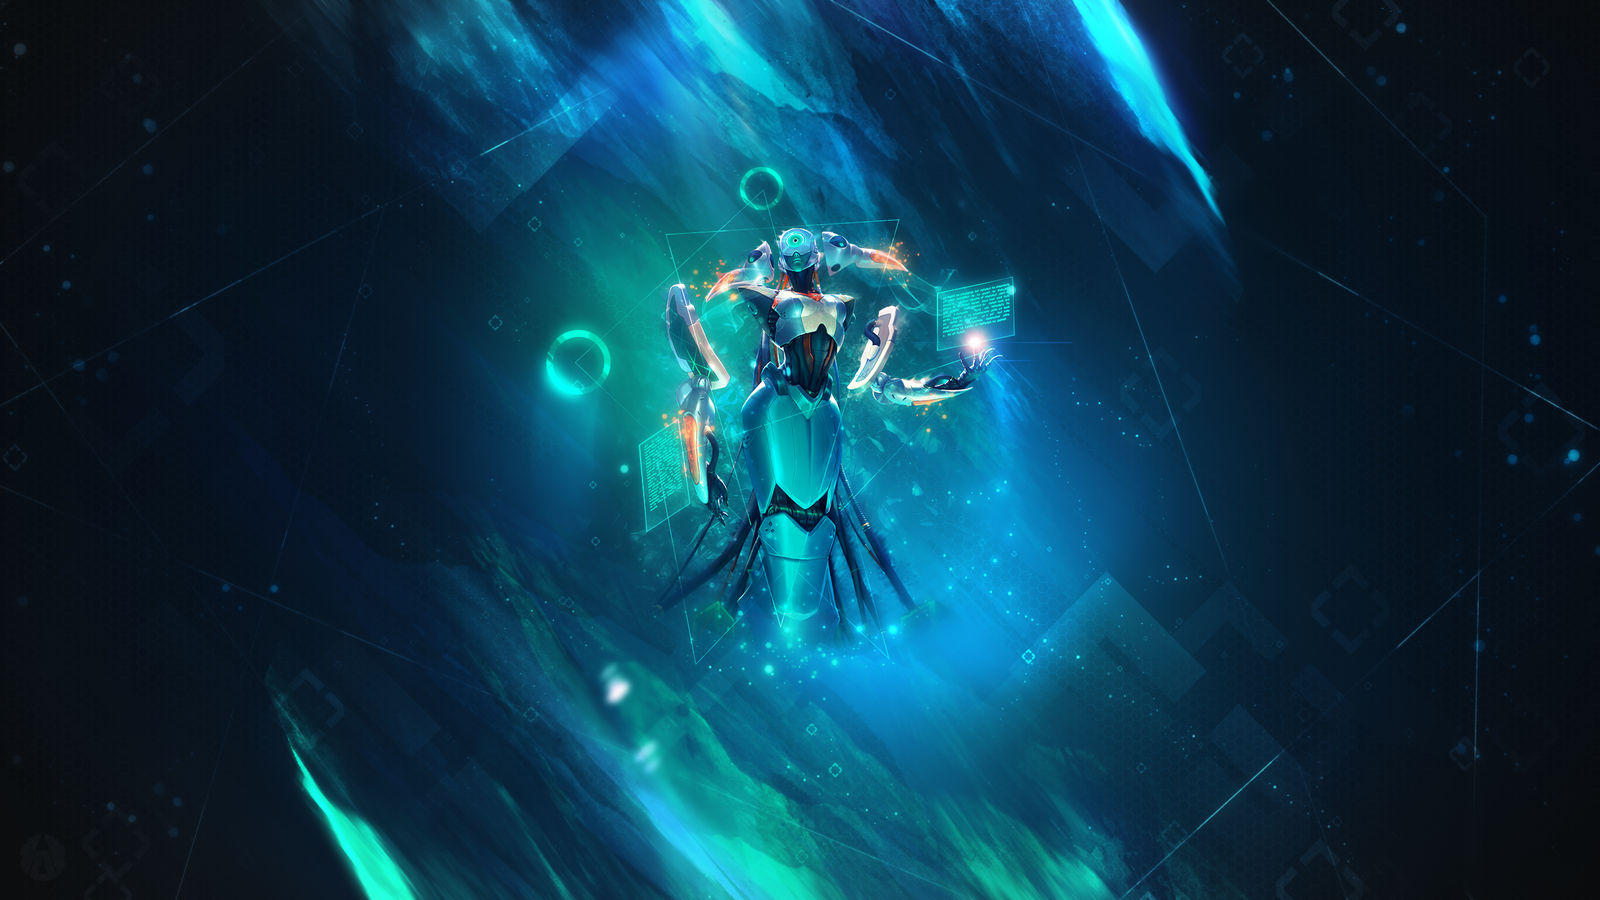 Program Lissandra League Of Legends Wallpaper By Aynoe On Images, Photos, Reviews